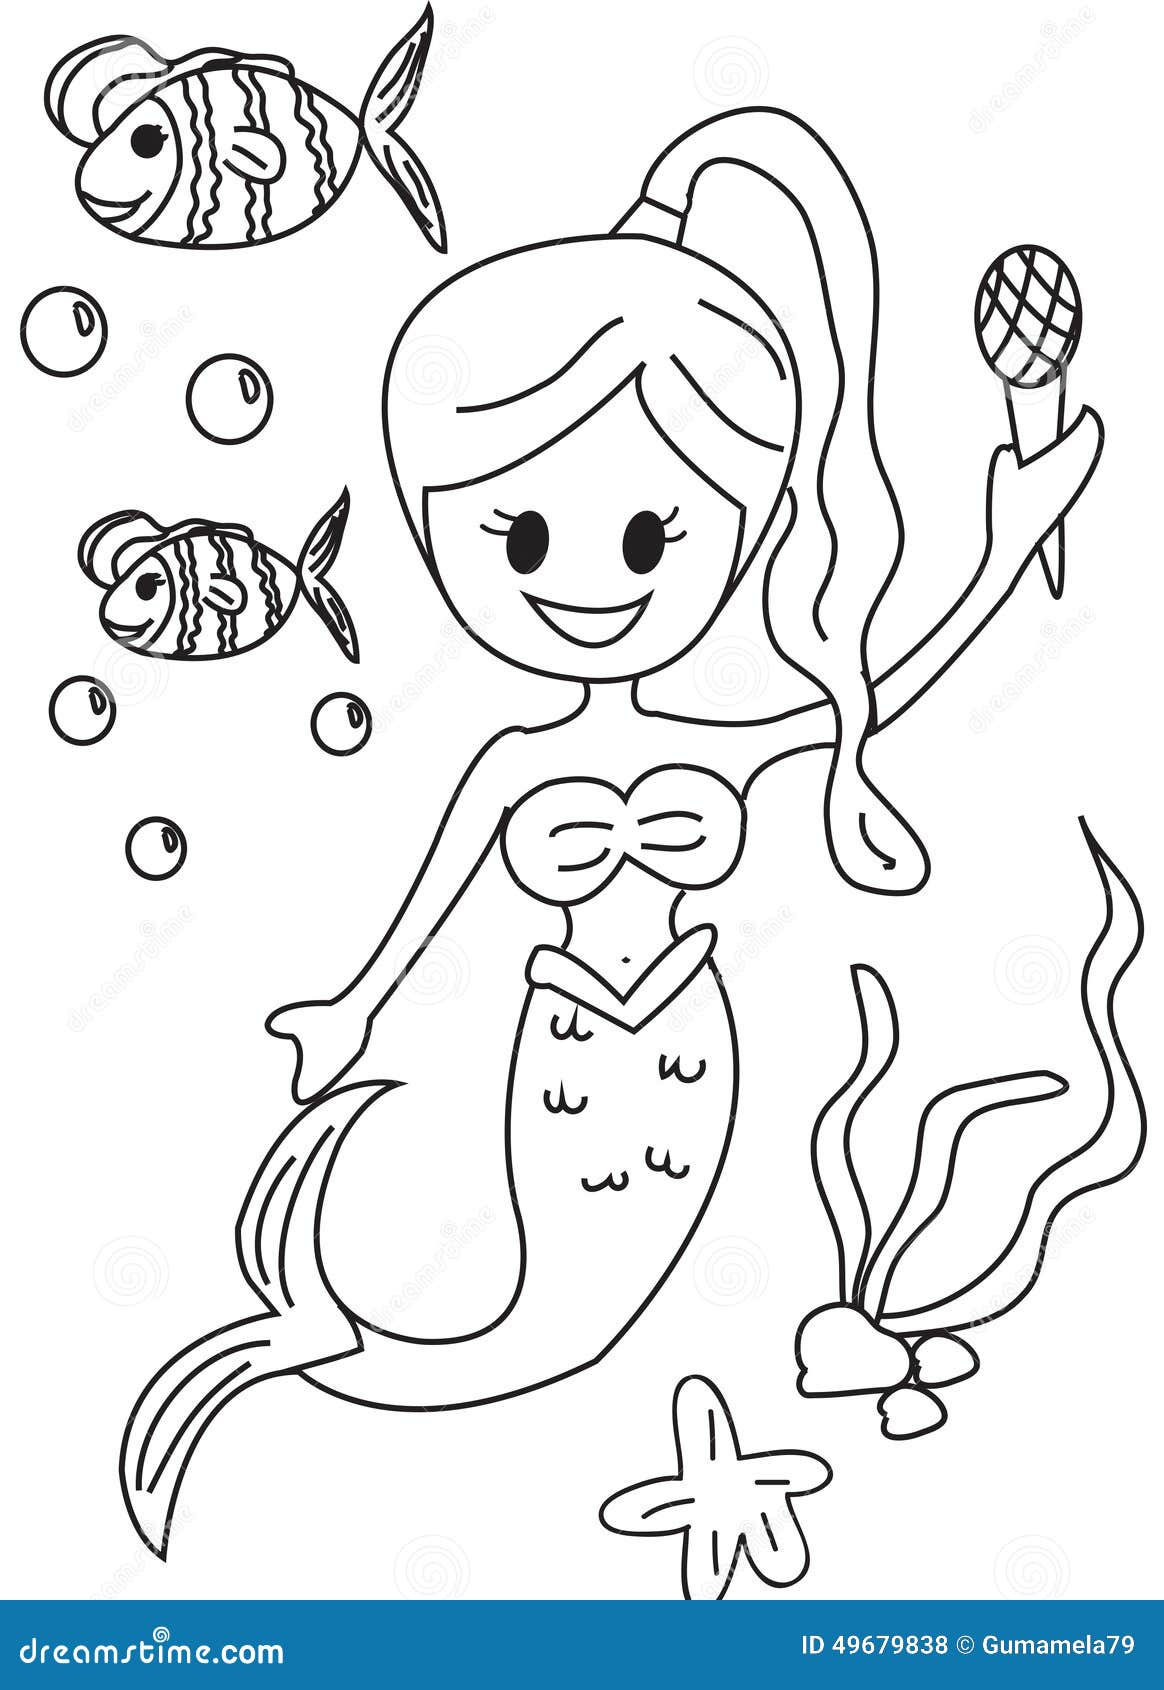 Hand Drawn Coloring Page Of A Mermaid Stock Illustration